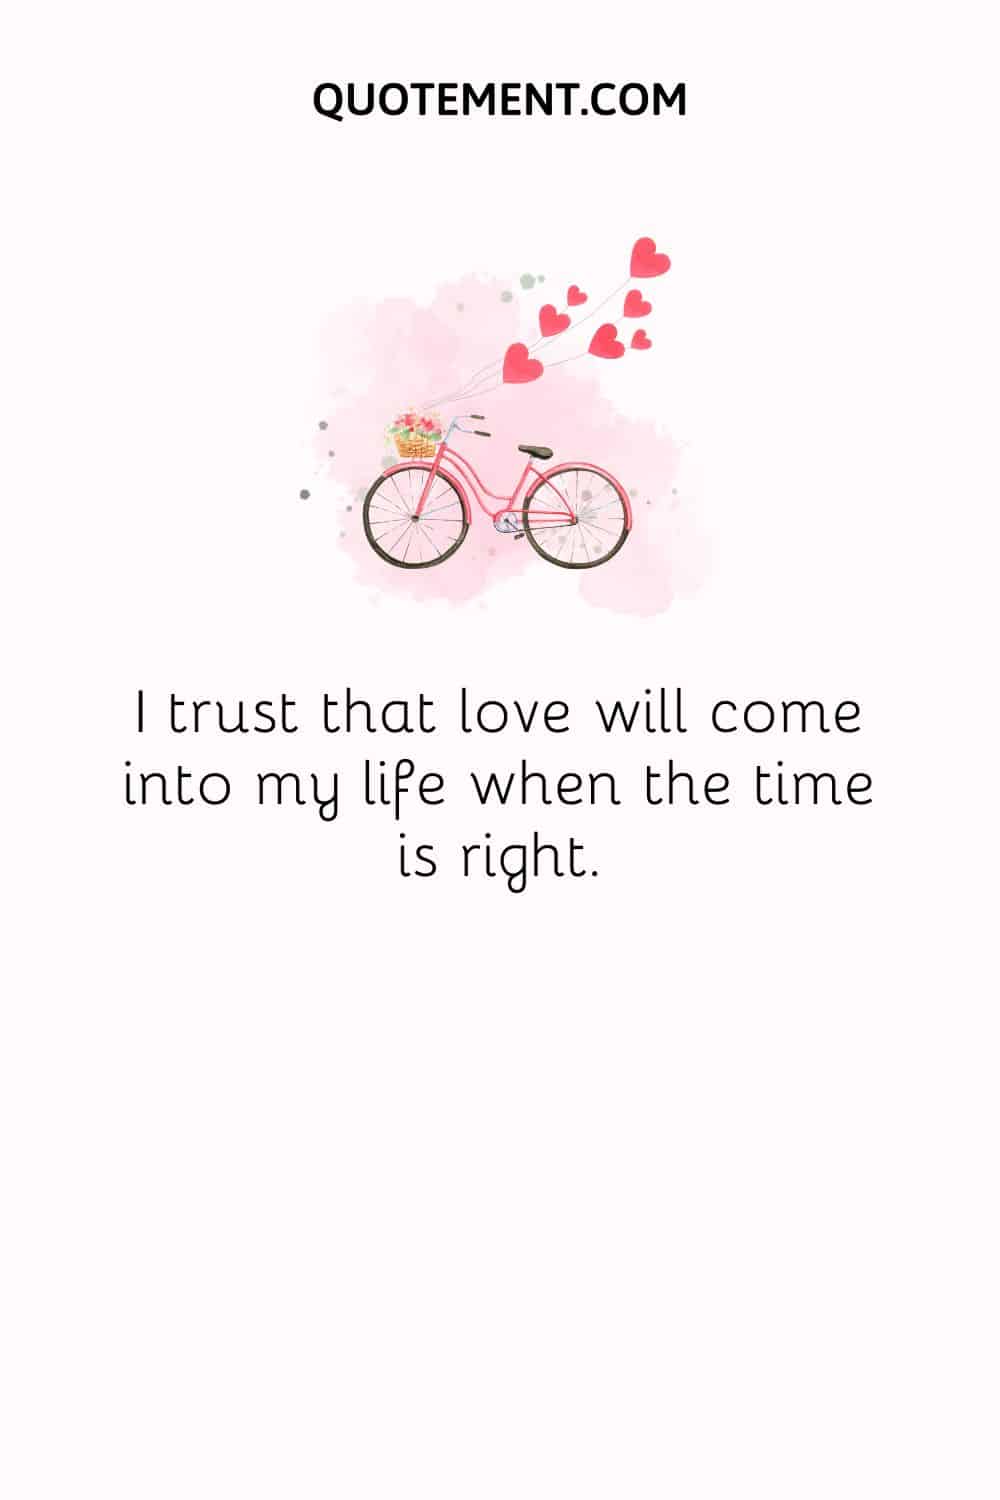 I trust that love will come into my life when the time is right